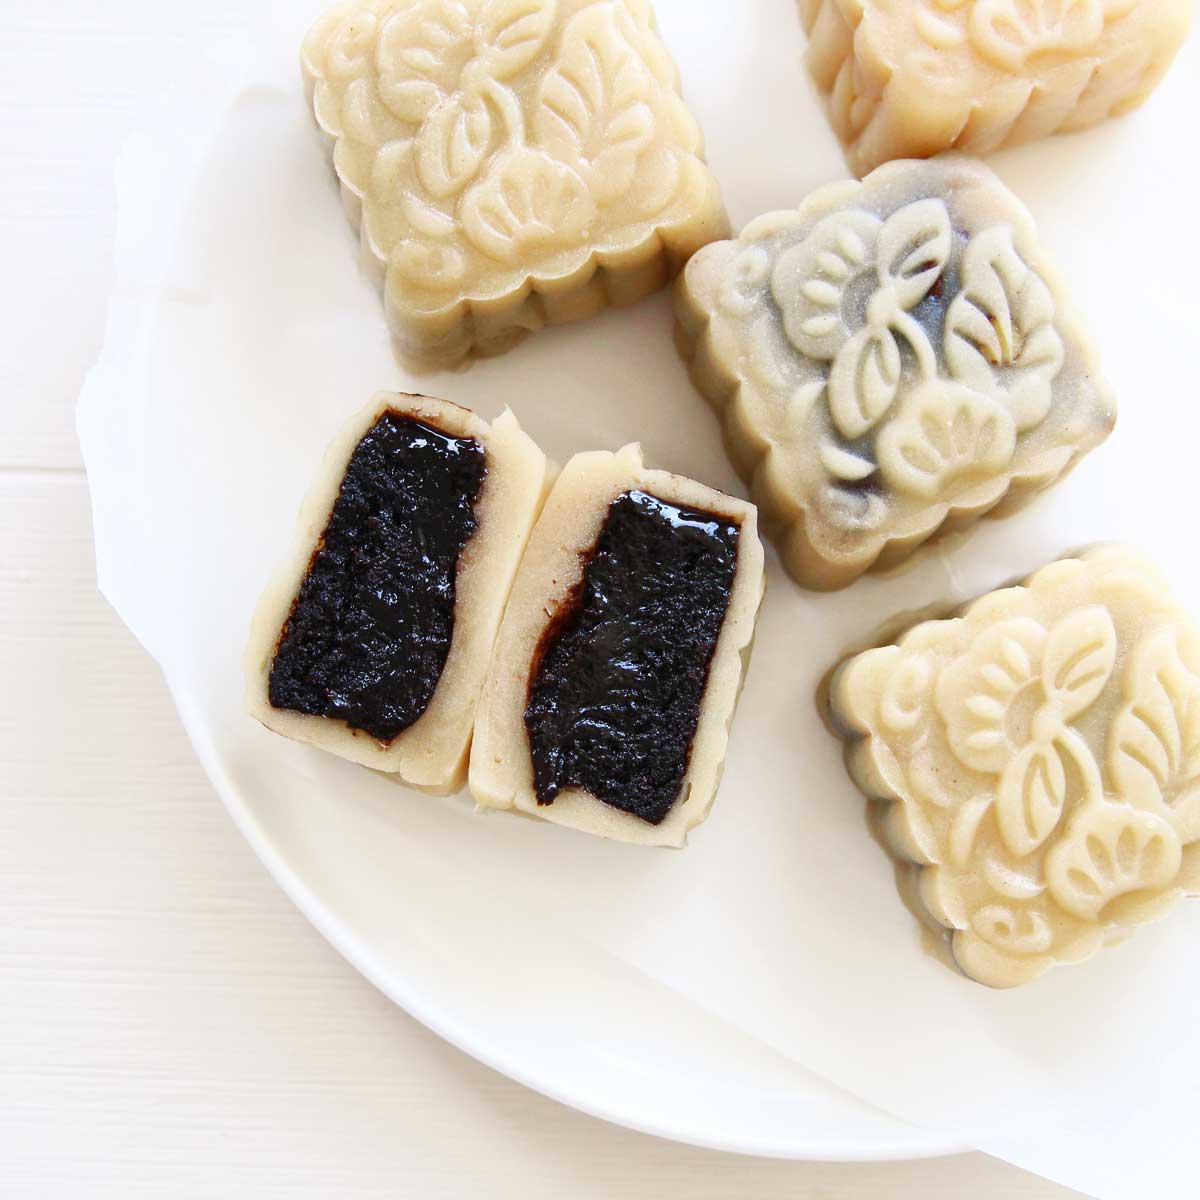 Peanut Butter Snow Skin Mooncakes with Brownie FIlling - Peanut Butter Glaze